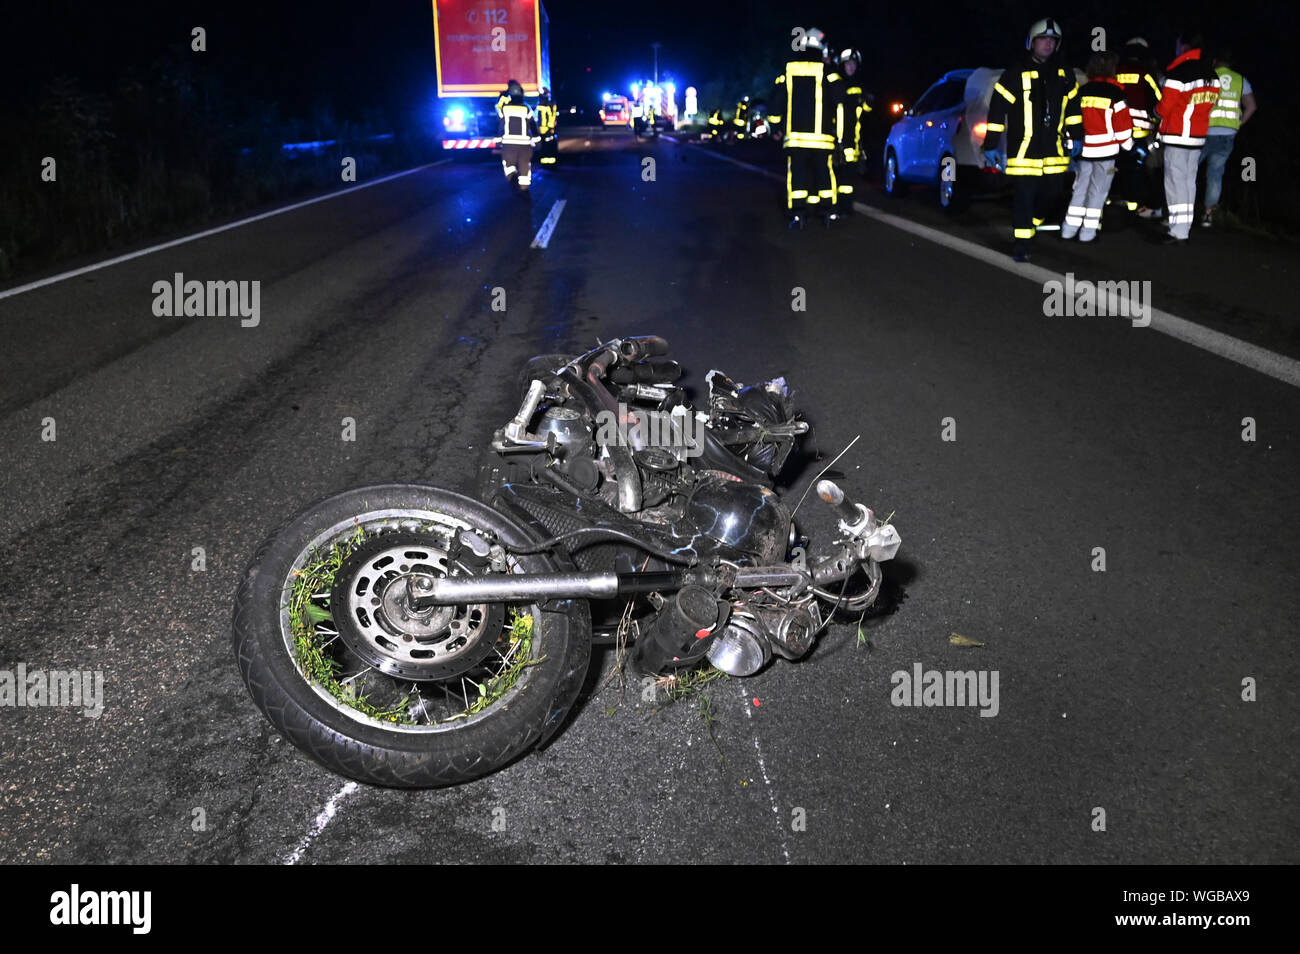 Dorsten, Germany. 03rd Aug, 2017. A motorcycle is lying on motorway 31. The accident killed a 61-year-old man and a 51-year-old woman from the Netherlands. A man had driven his car onto the motorcycle for unknown reasons, the police reported. The motorcycle was thrown over the road by the force of the impact. According to the investigation, another female driver noticed the accident too late and was no longer able to brake. Credit: Guido Bludau/dpa/Alamy Live News Stock Photo